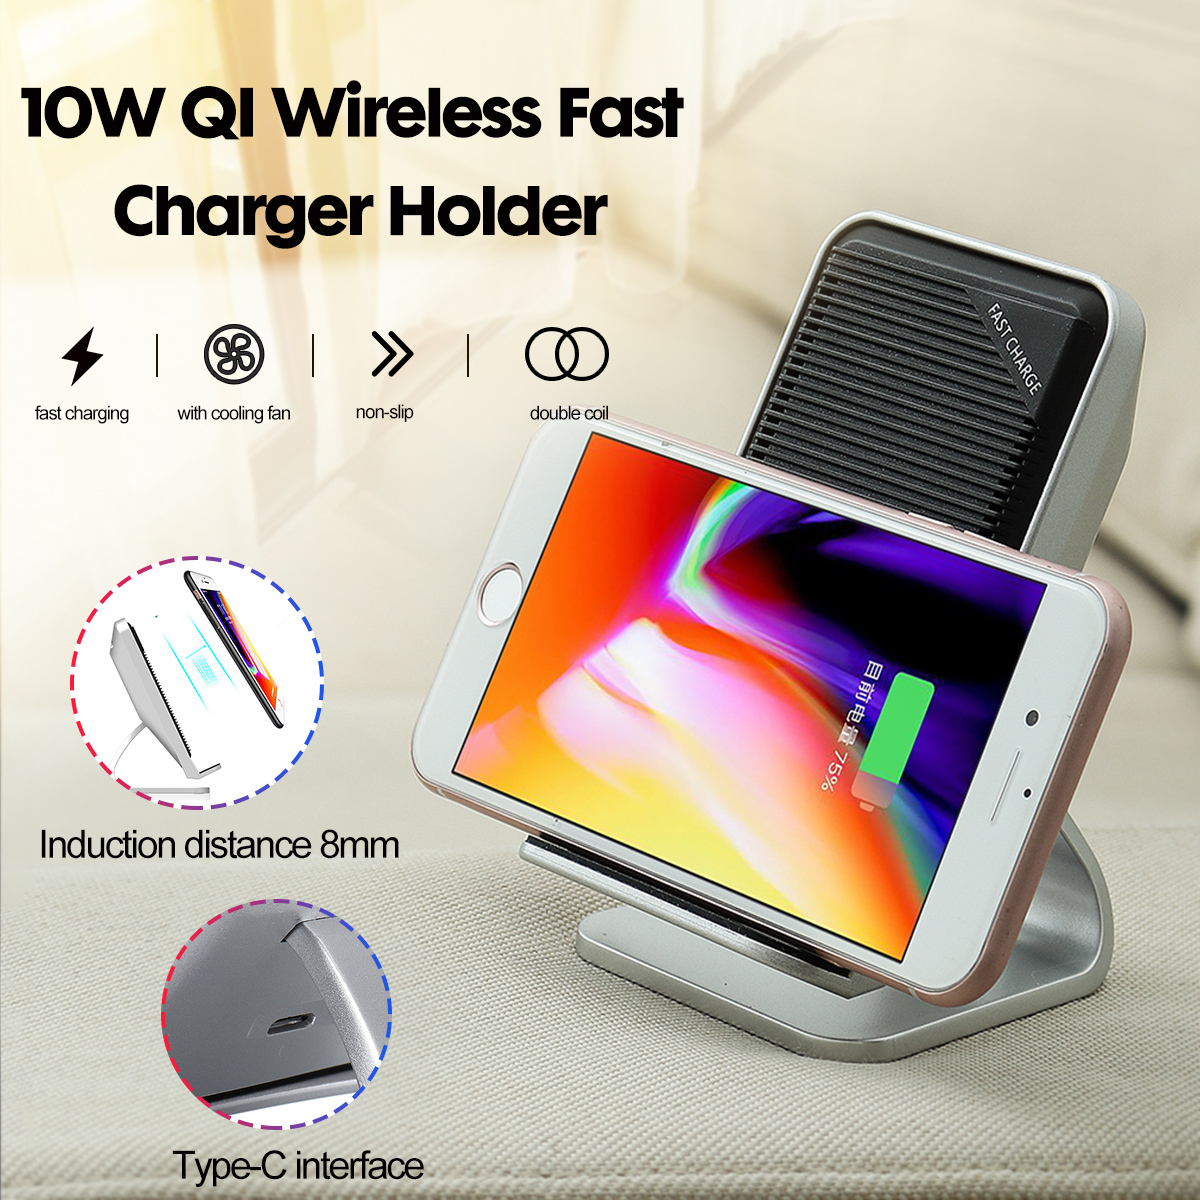 Bakeey-10W-QI-Wireless-Fast-Charger-Holder-Double-Coil-With-Cooling-Fan-Type-C-for-iPhone-11-Pro-for-1600441-2